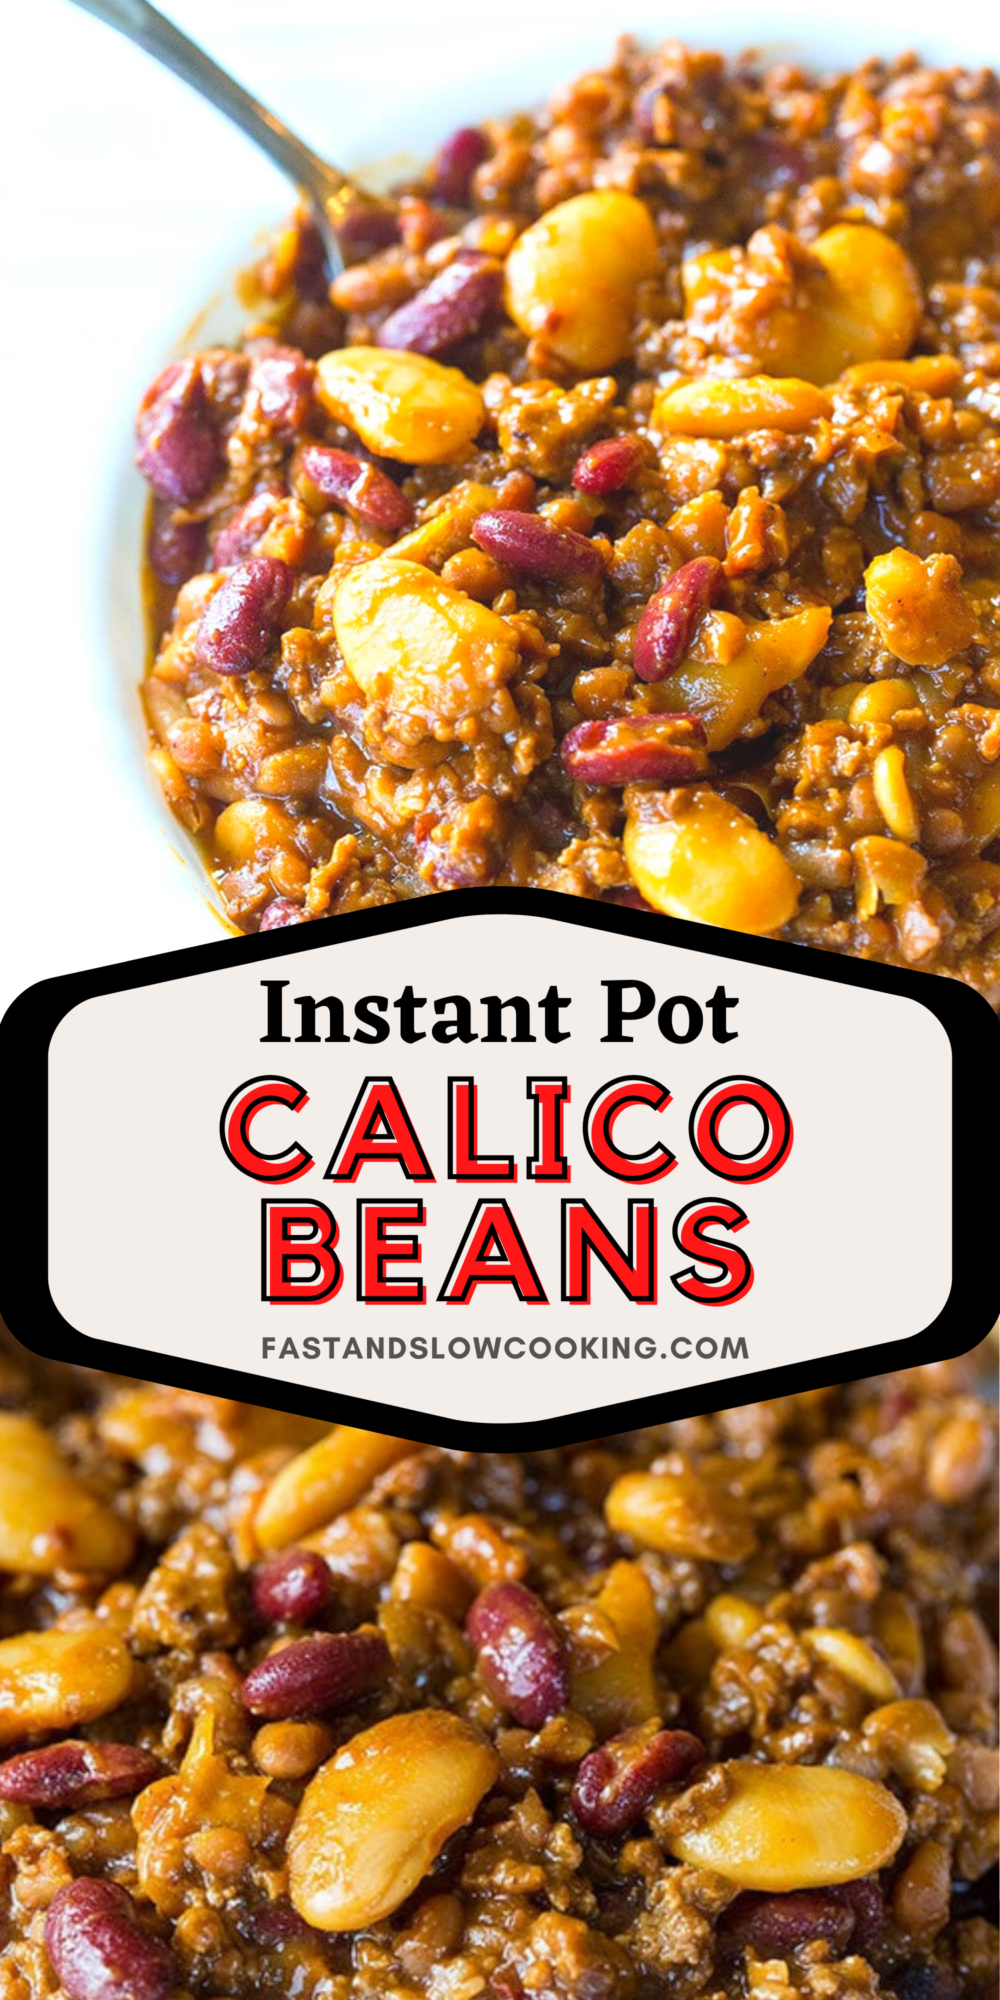 Instant Pot Calico Beans are a fabulous new twist on the classic ground beef and beans dish! Now you can cook up calico beans lickety split in your pressure cooker! 